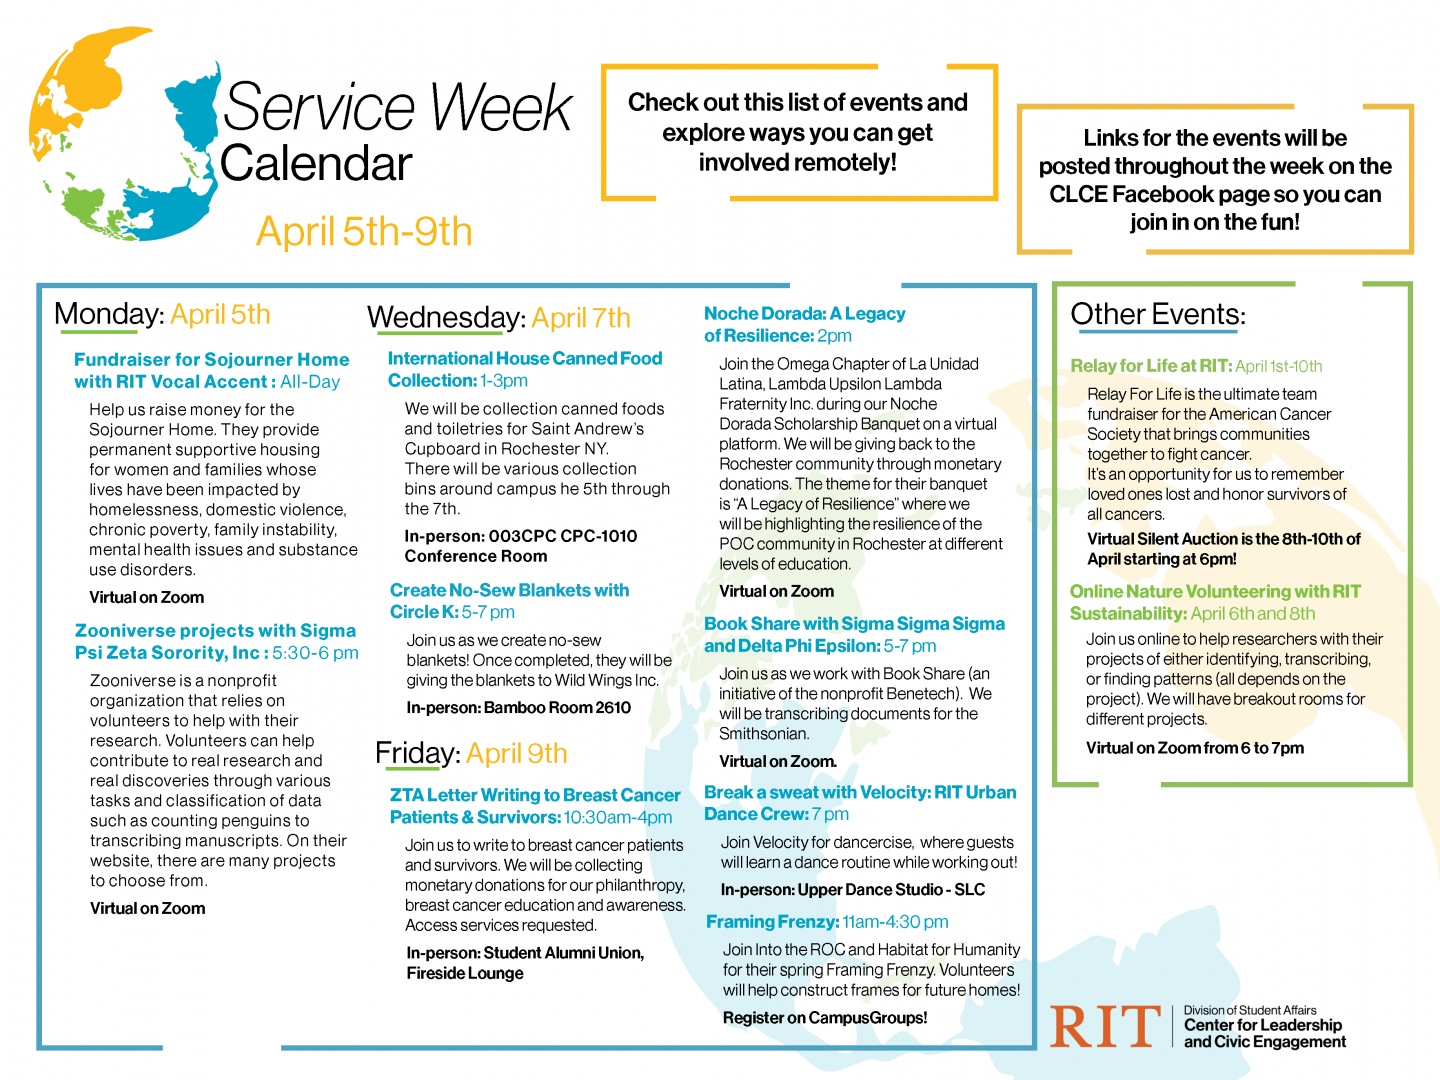 A scheduled listing of all events happening during Service Week.